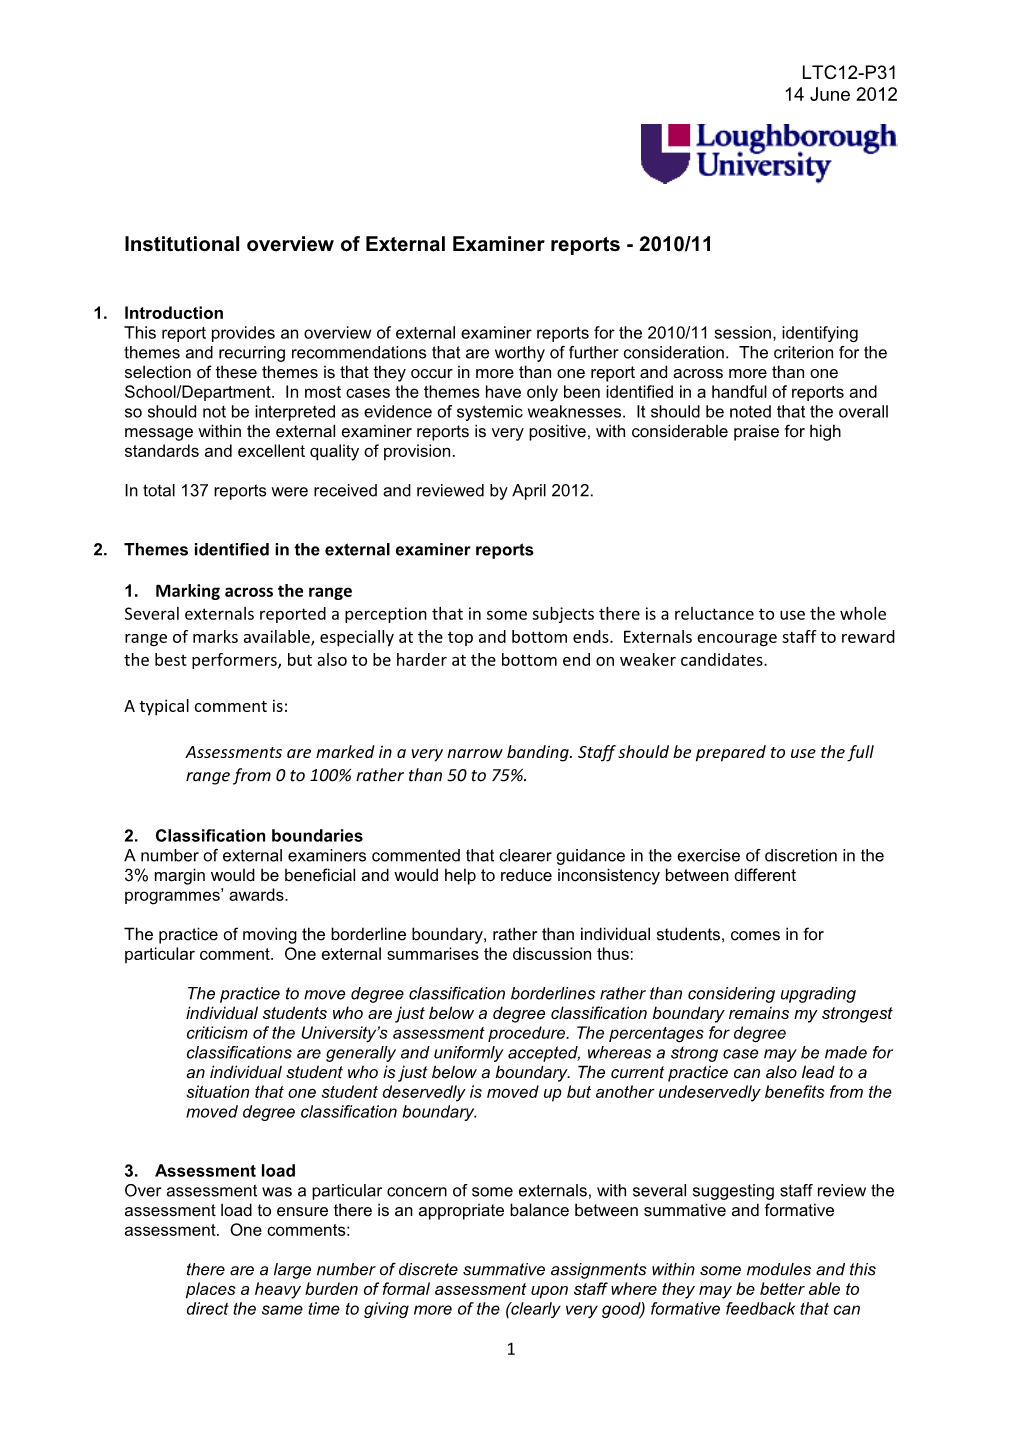 Institutional Overview of External Examiner Reports - 2010/11